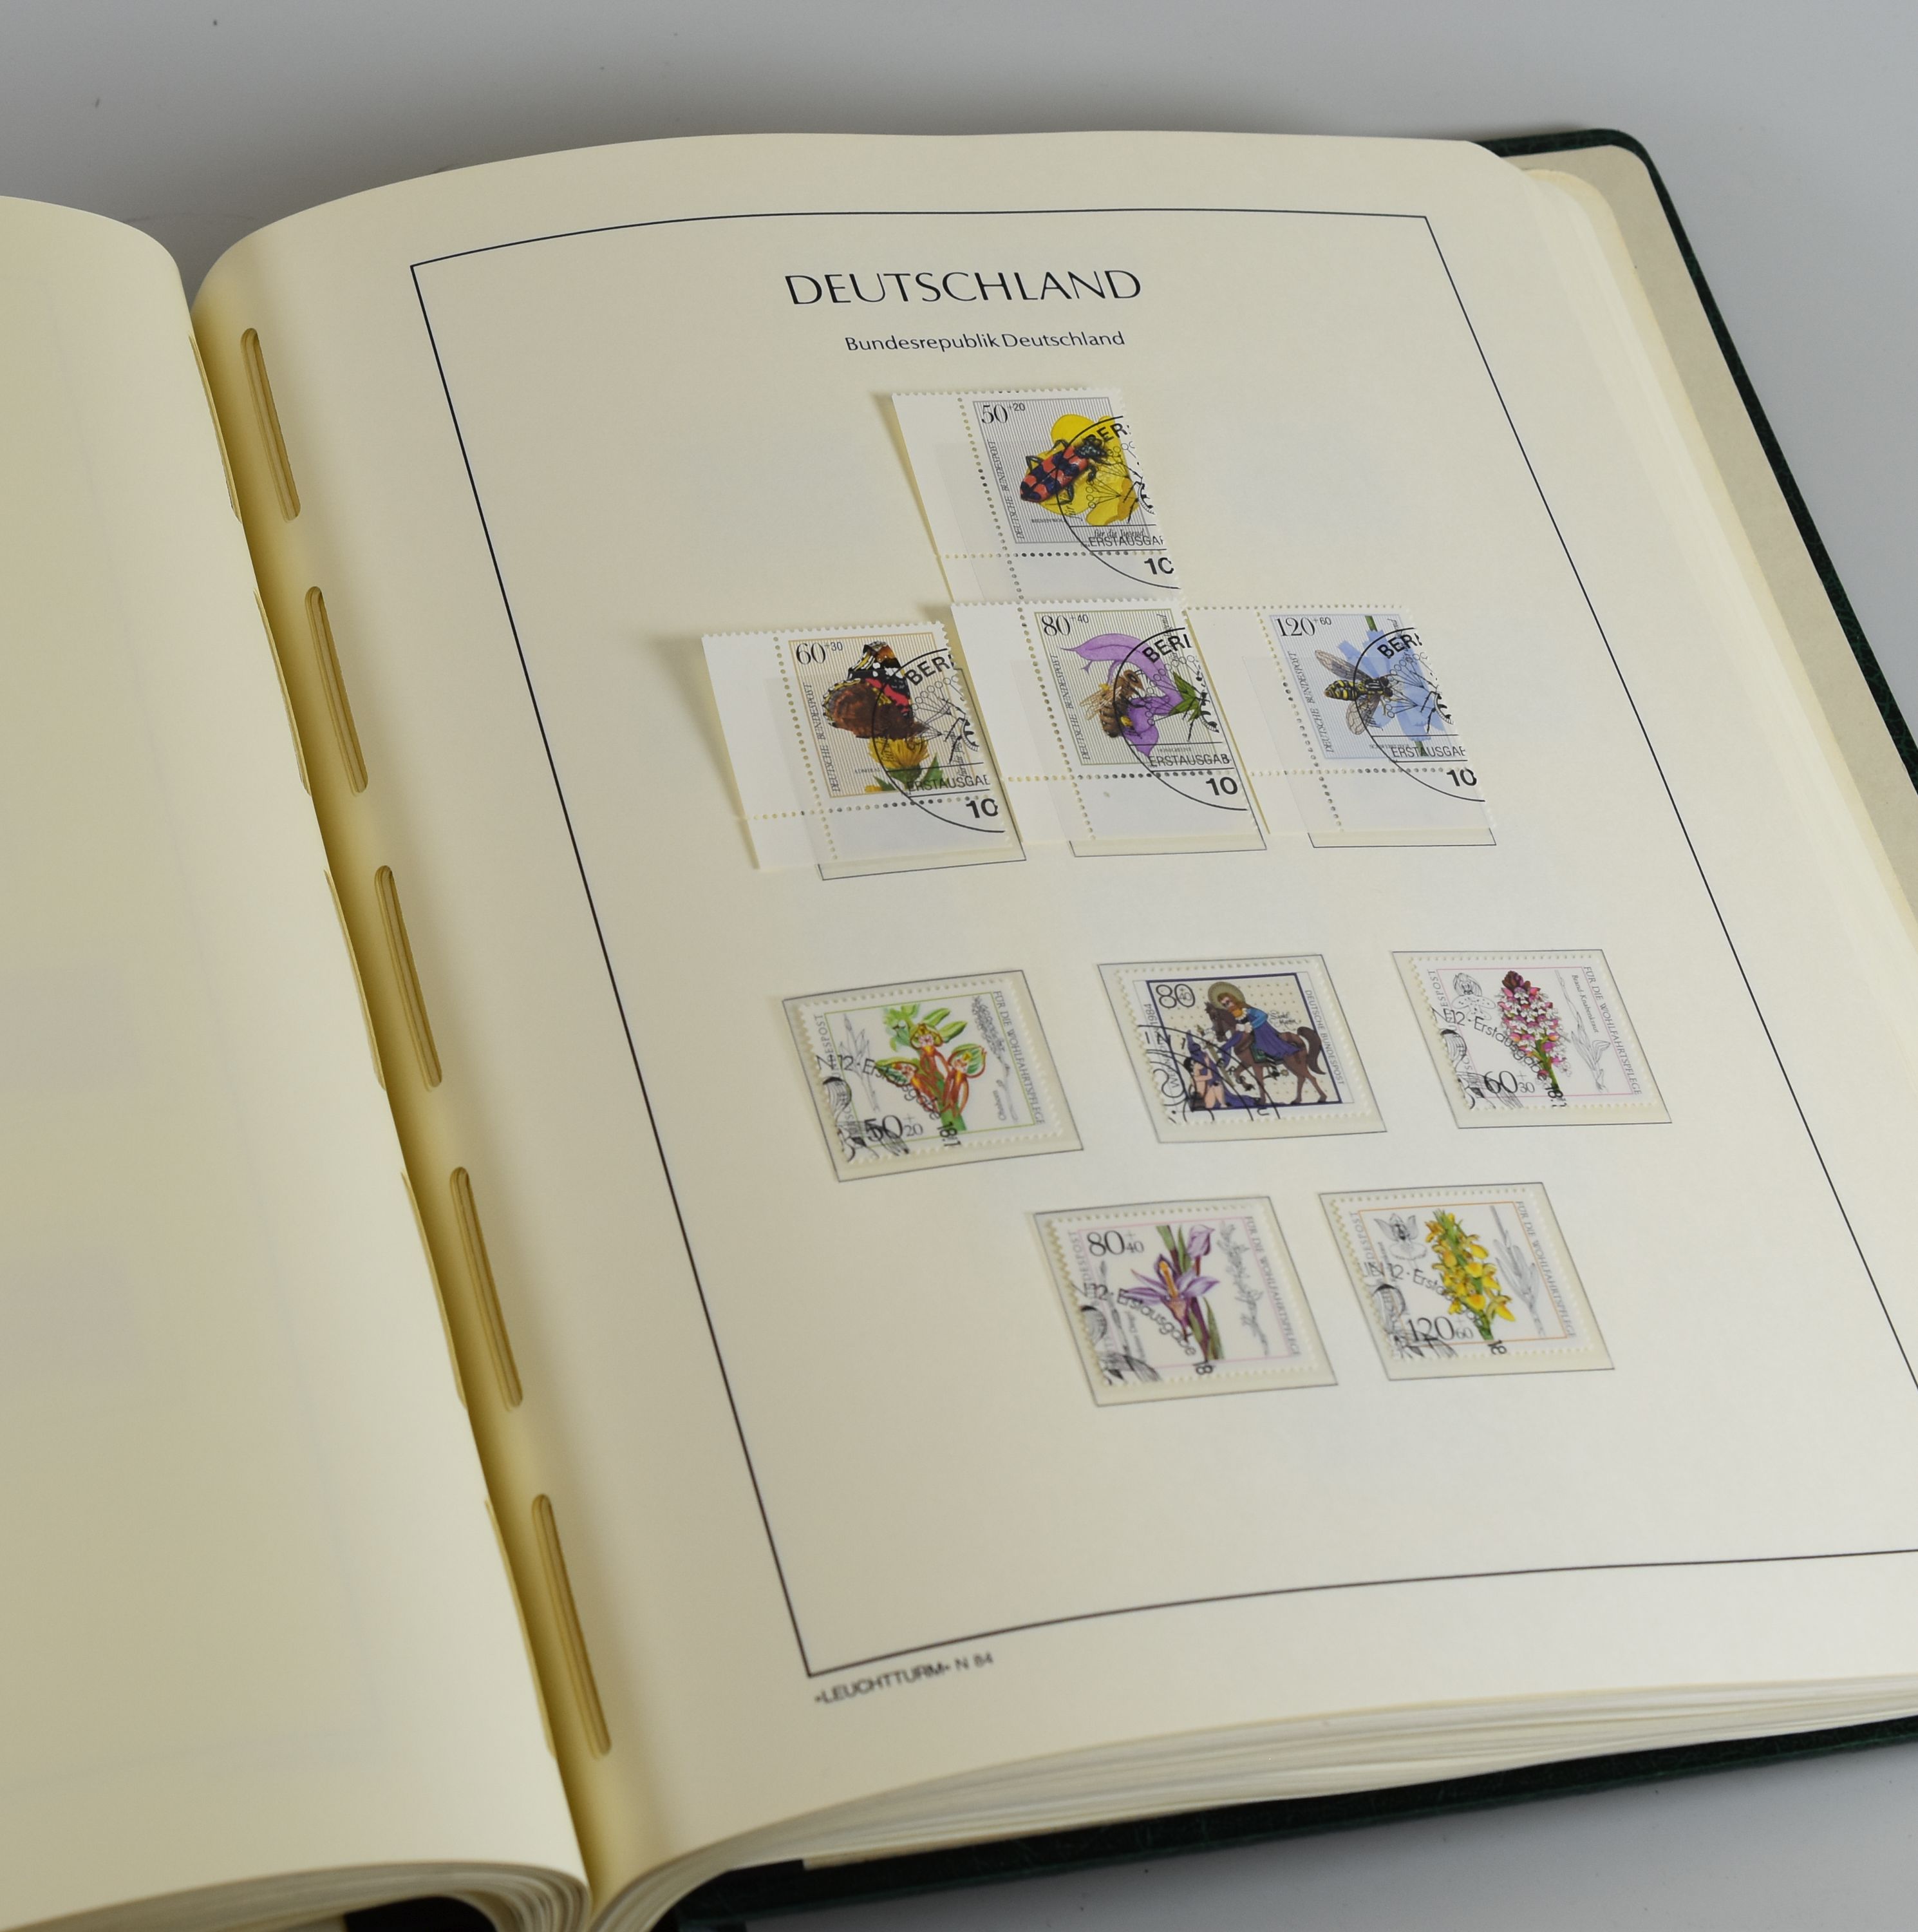 AN ALBUM OF GERMAN STAMPS professionally completed in chronological order from 1970 & GREEN ALBUM OF - Image 2 of 2